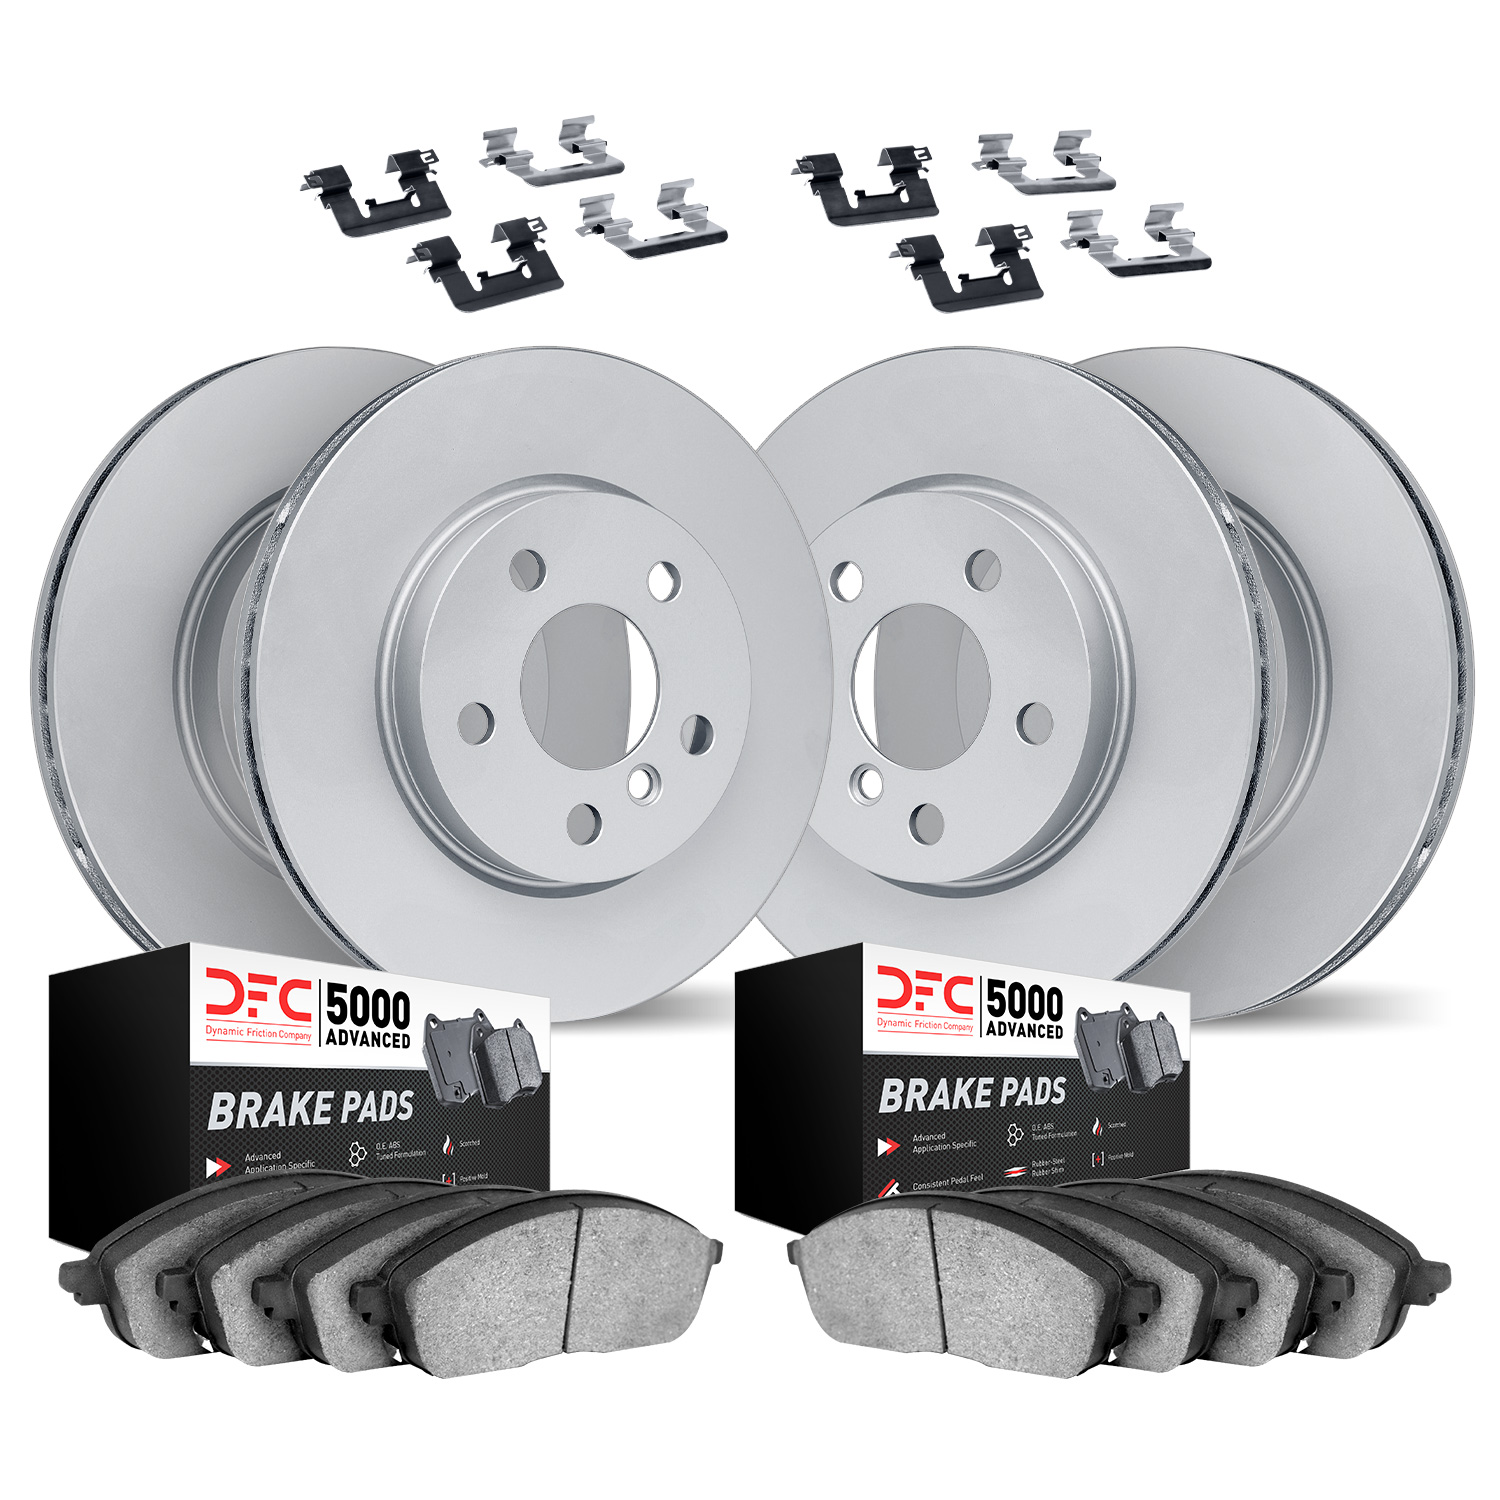 9514-31183 GEOMET Brake Rotors w/5000 Advanced Brake Pads Kit & Hardware, Fits Select Lexus/Toyota/Scion, Position: Front and Re